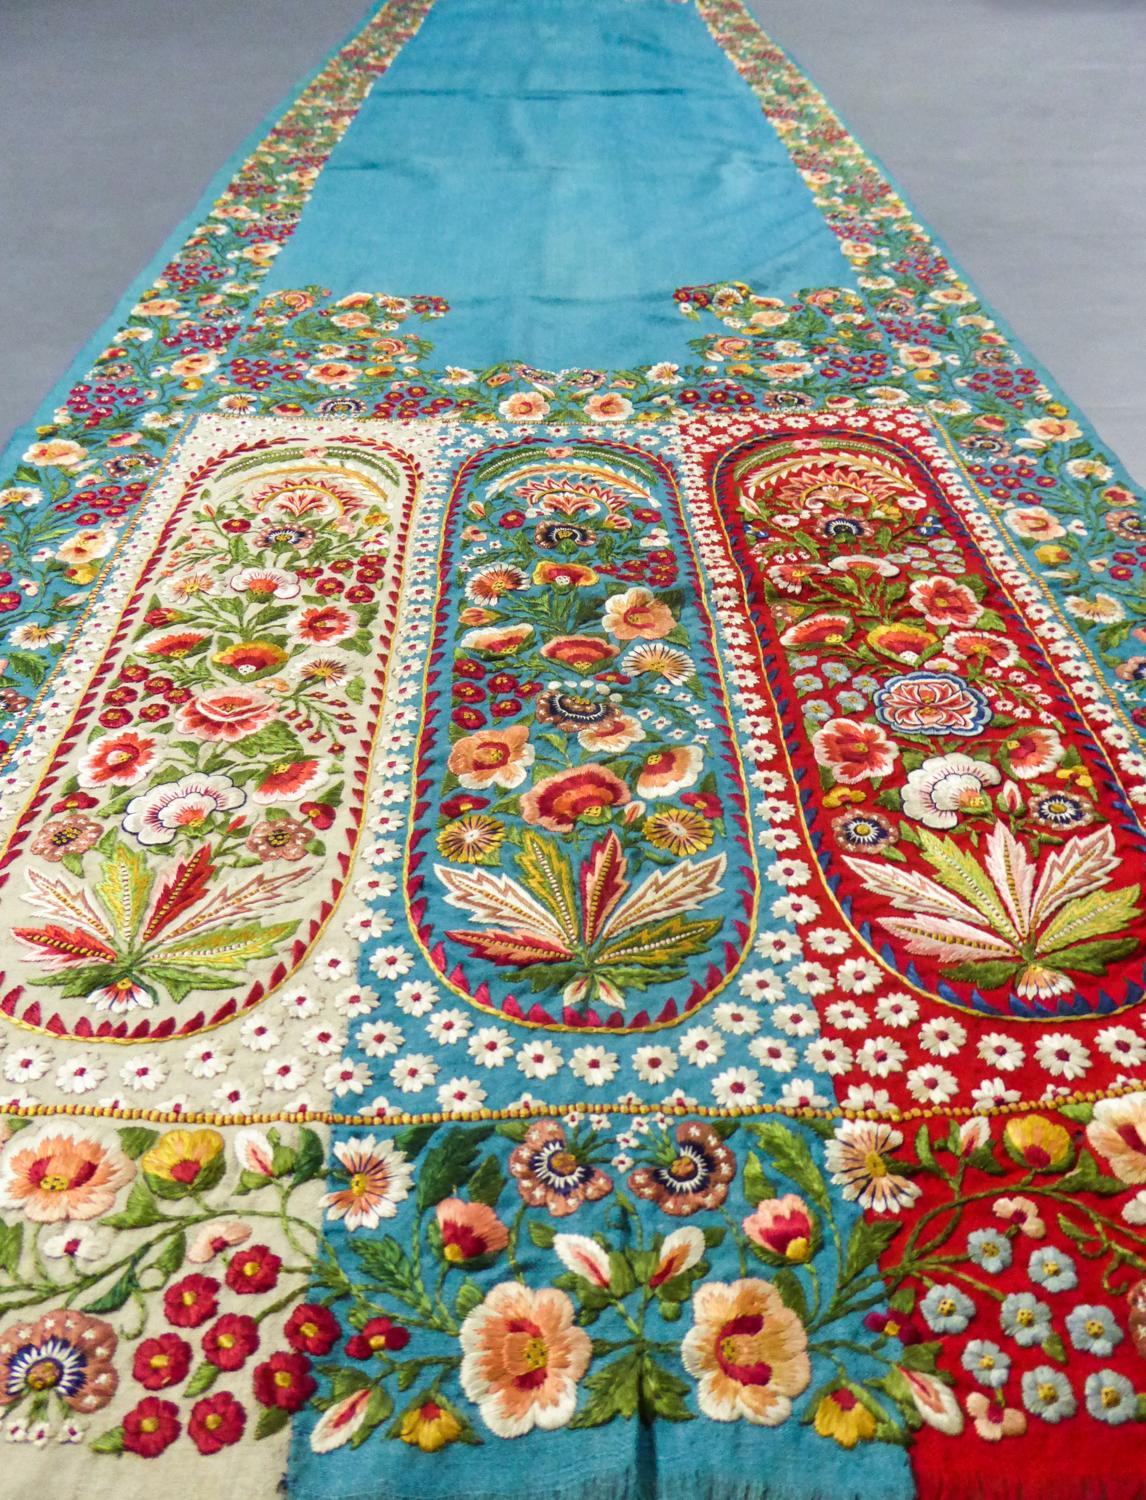 Women's or Men's Scarf in Embroidered Pashmina - India for Europe Circa 1830/1860 For Sale